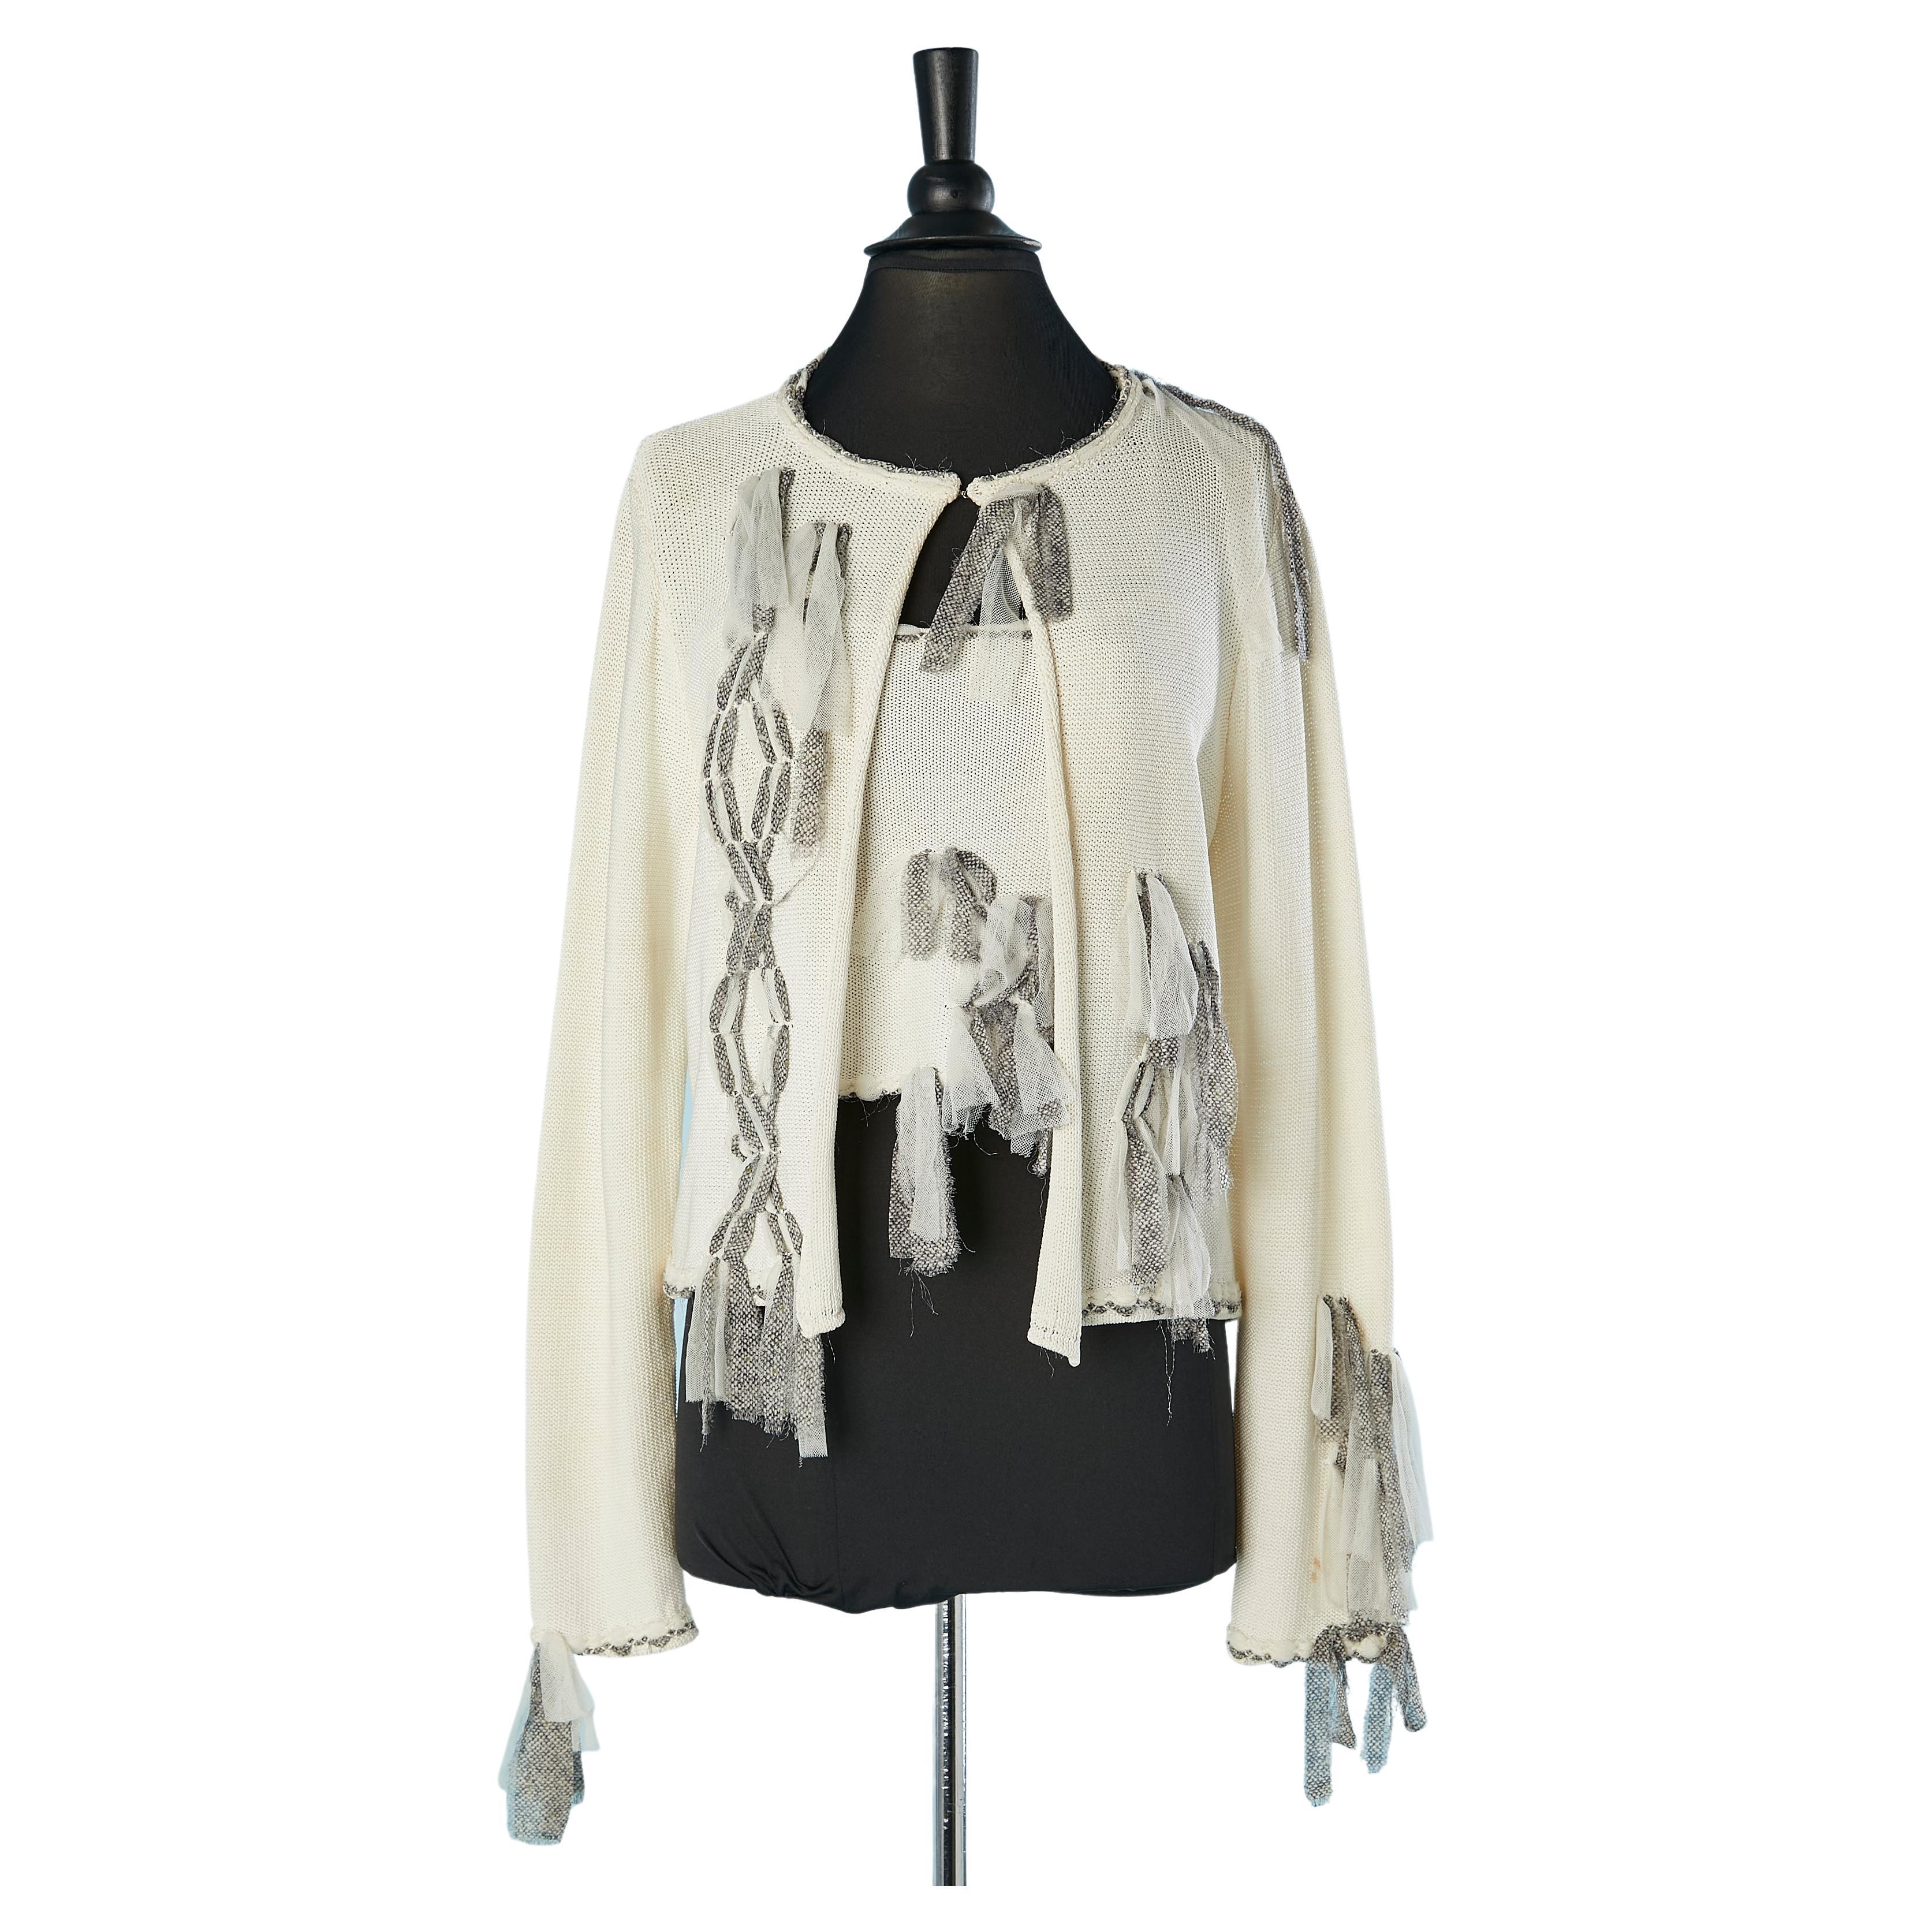 Off-white knit cardigan and bustier ensemble Christian Dior Boutique  For Sale